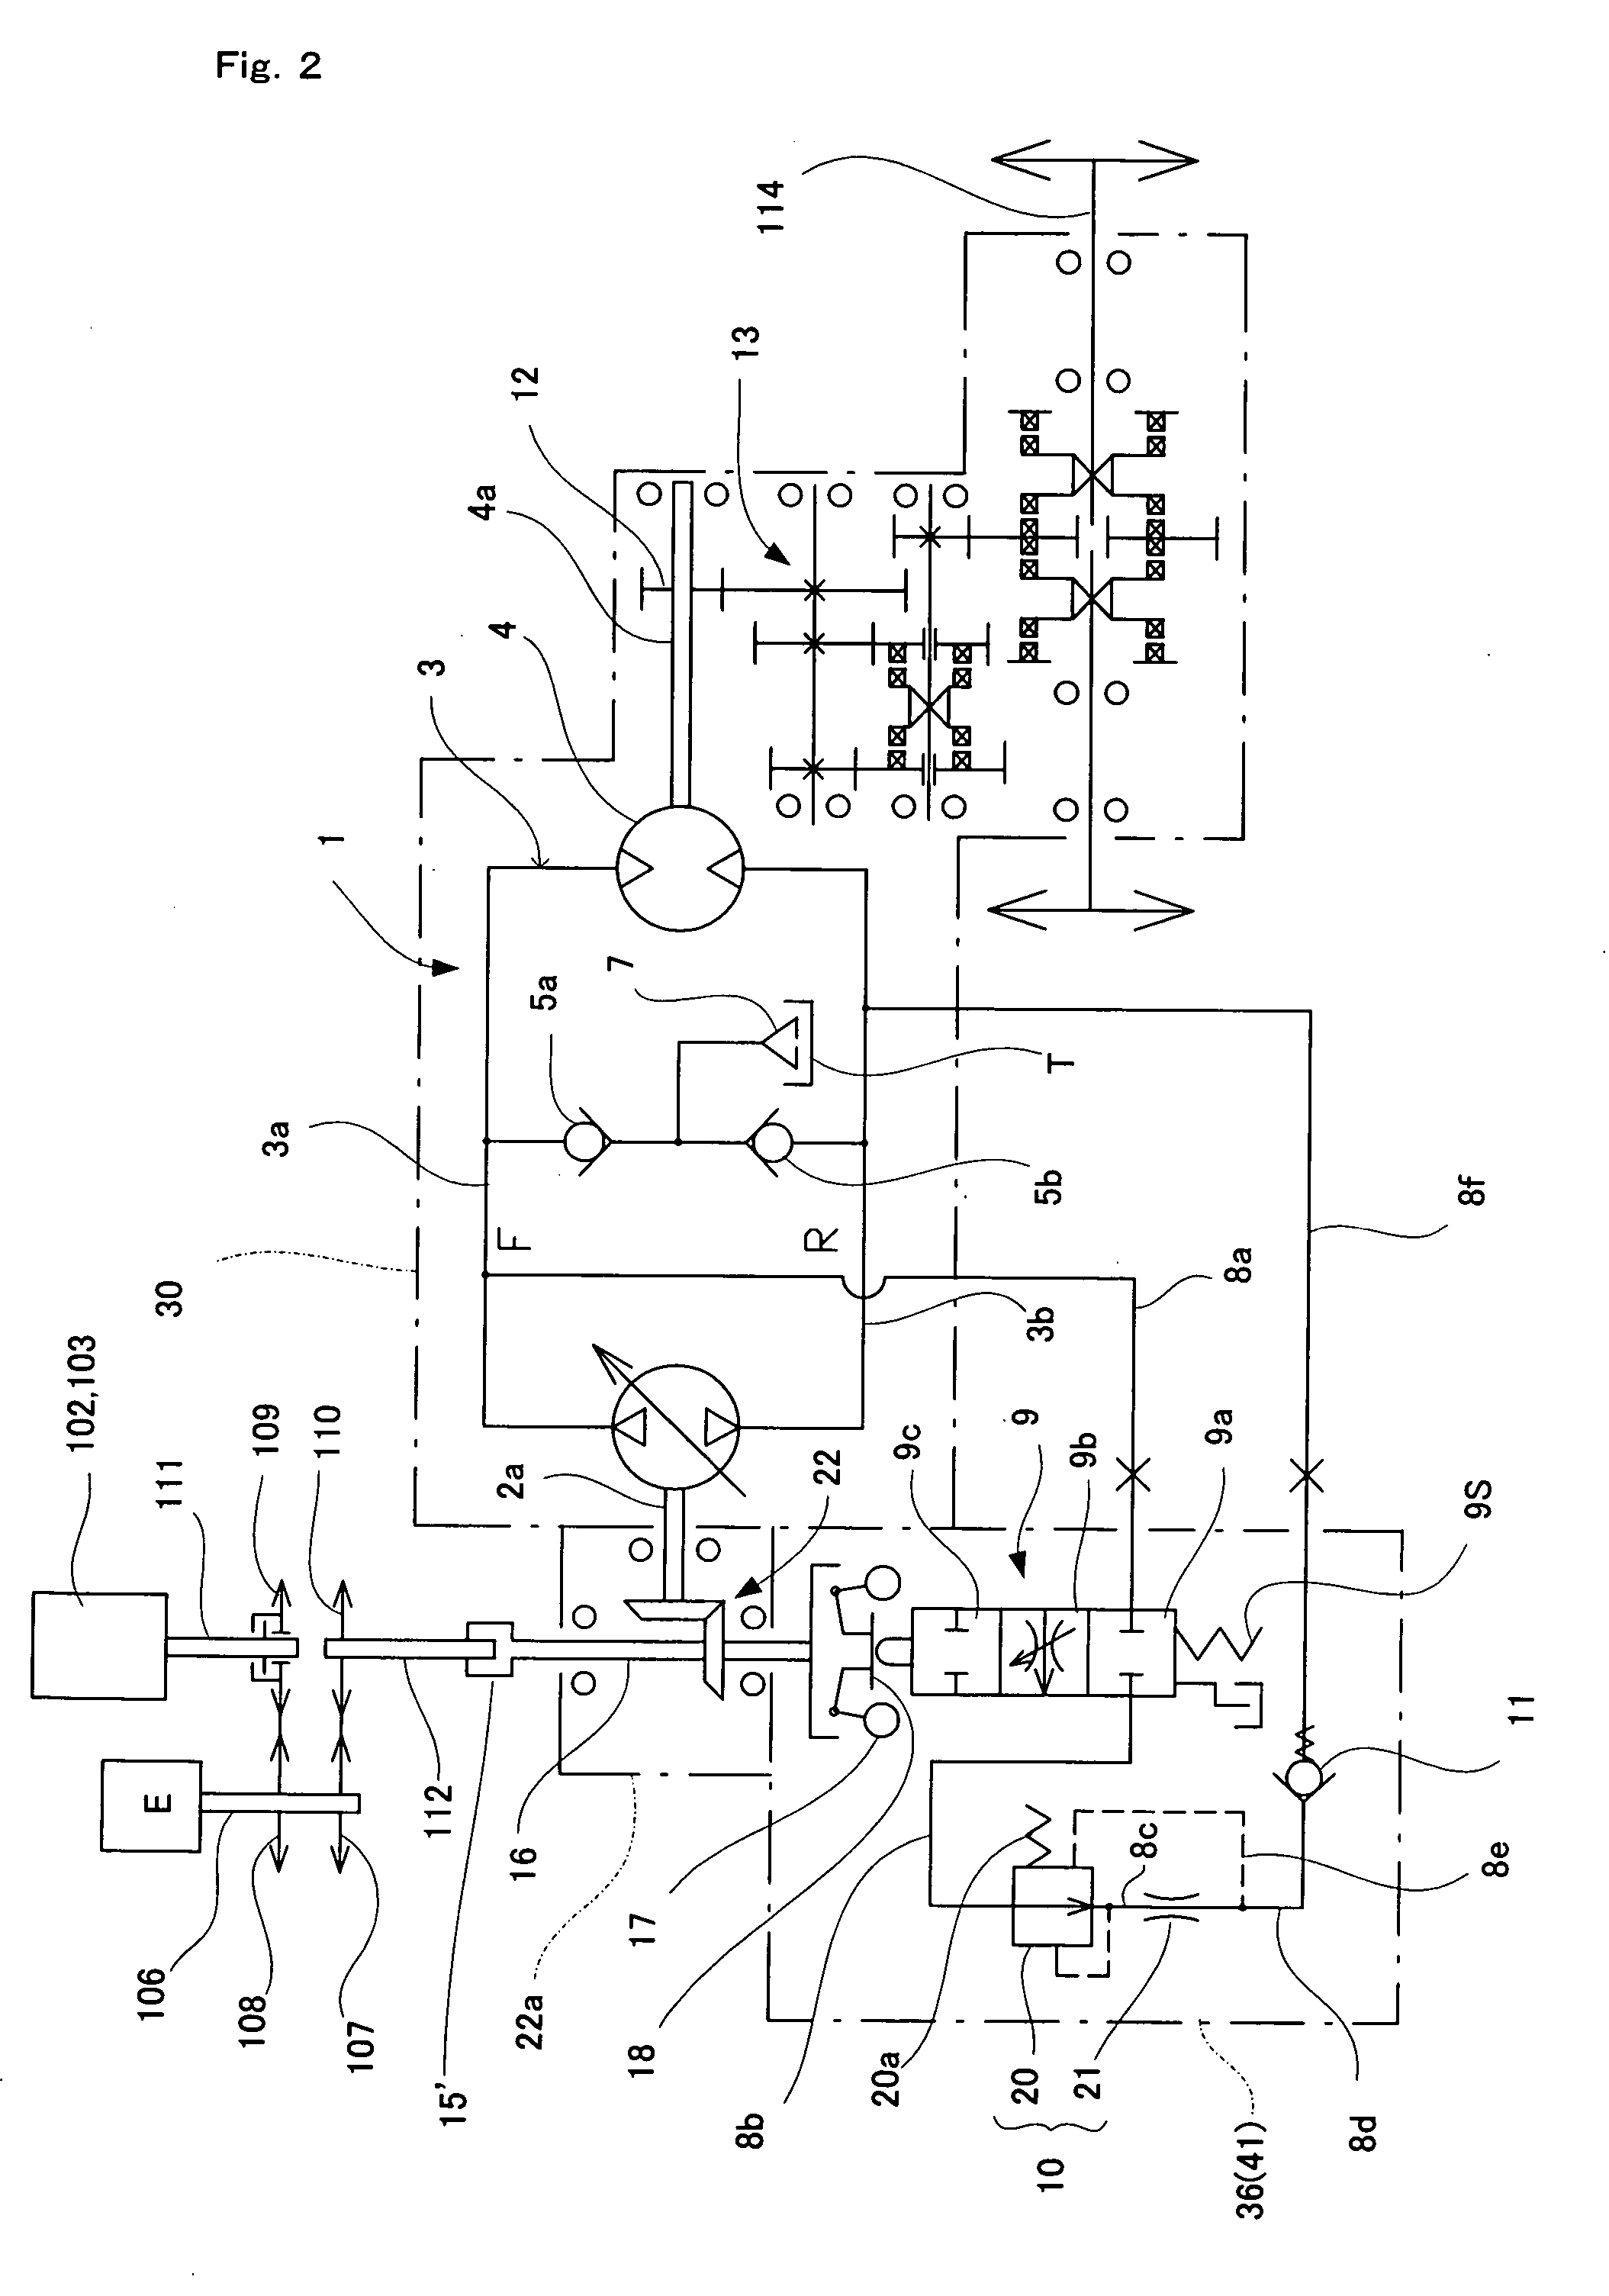 Load controller for hydrostatic transmission in work vehicles